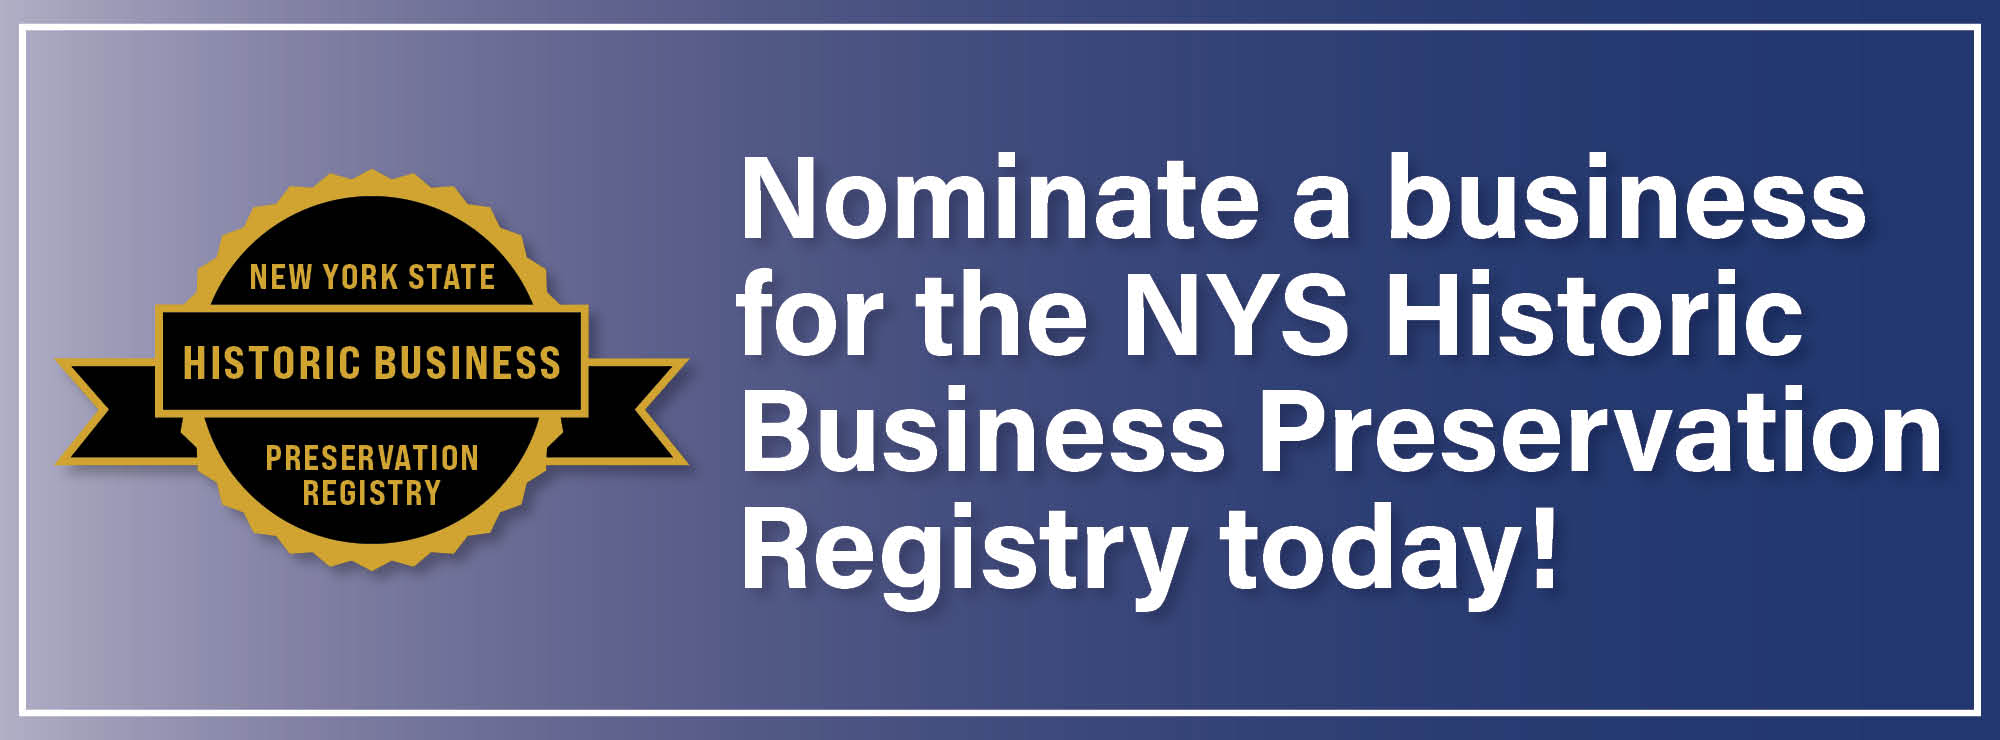 Nominate a business for the NYS Historic Business Preservation Registry